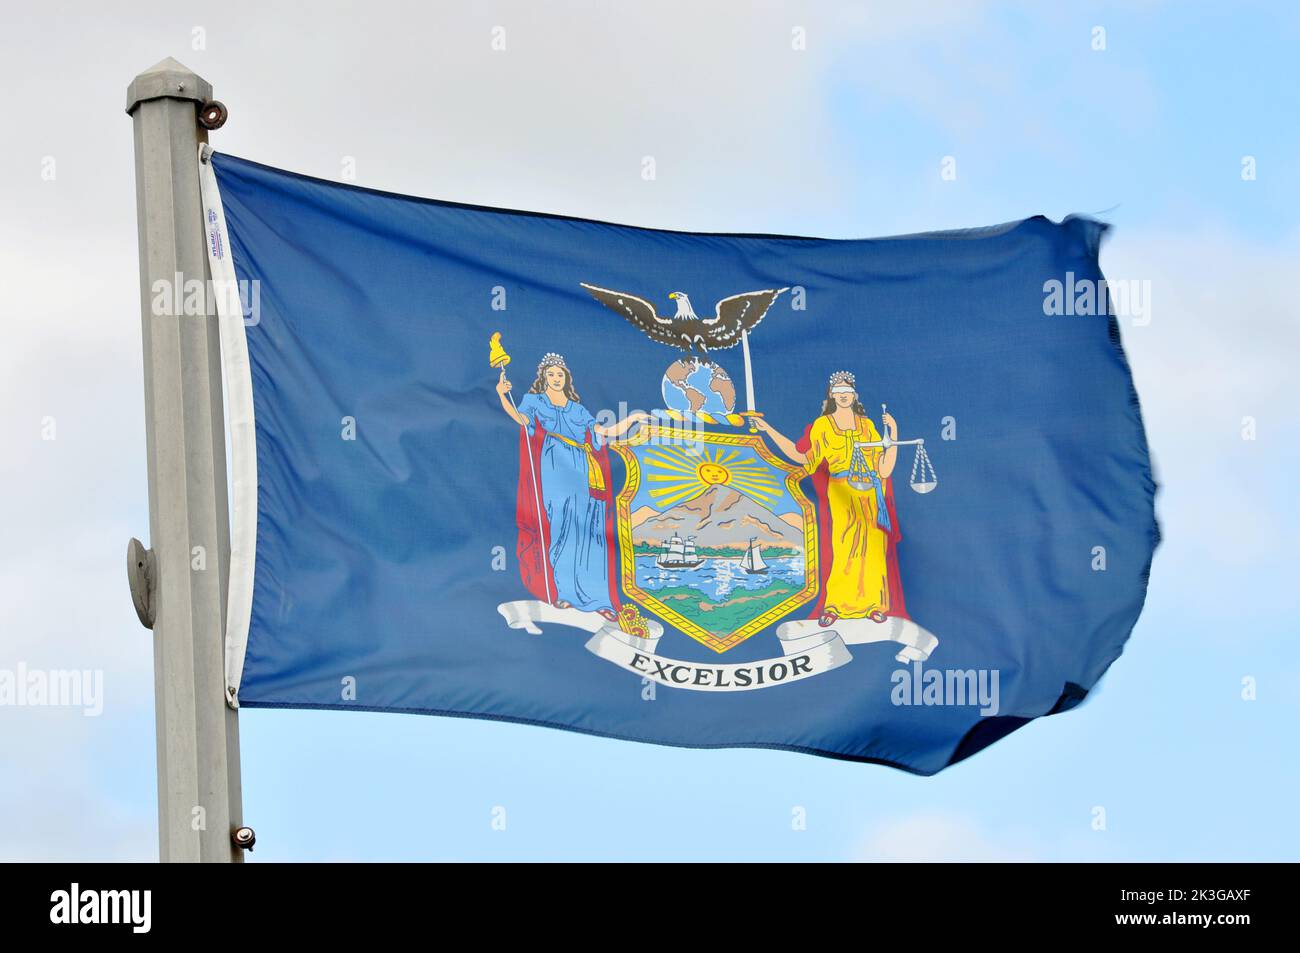 Flag of New York State in blue sky background in village of Waddington, Town of Waddington, Upstate New York NY, USA. Stock Photo